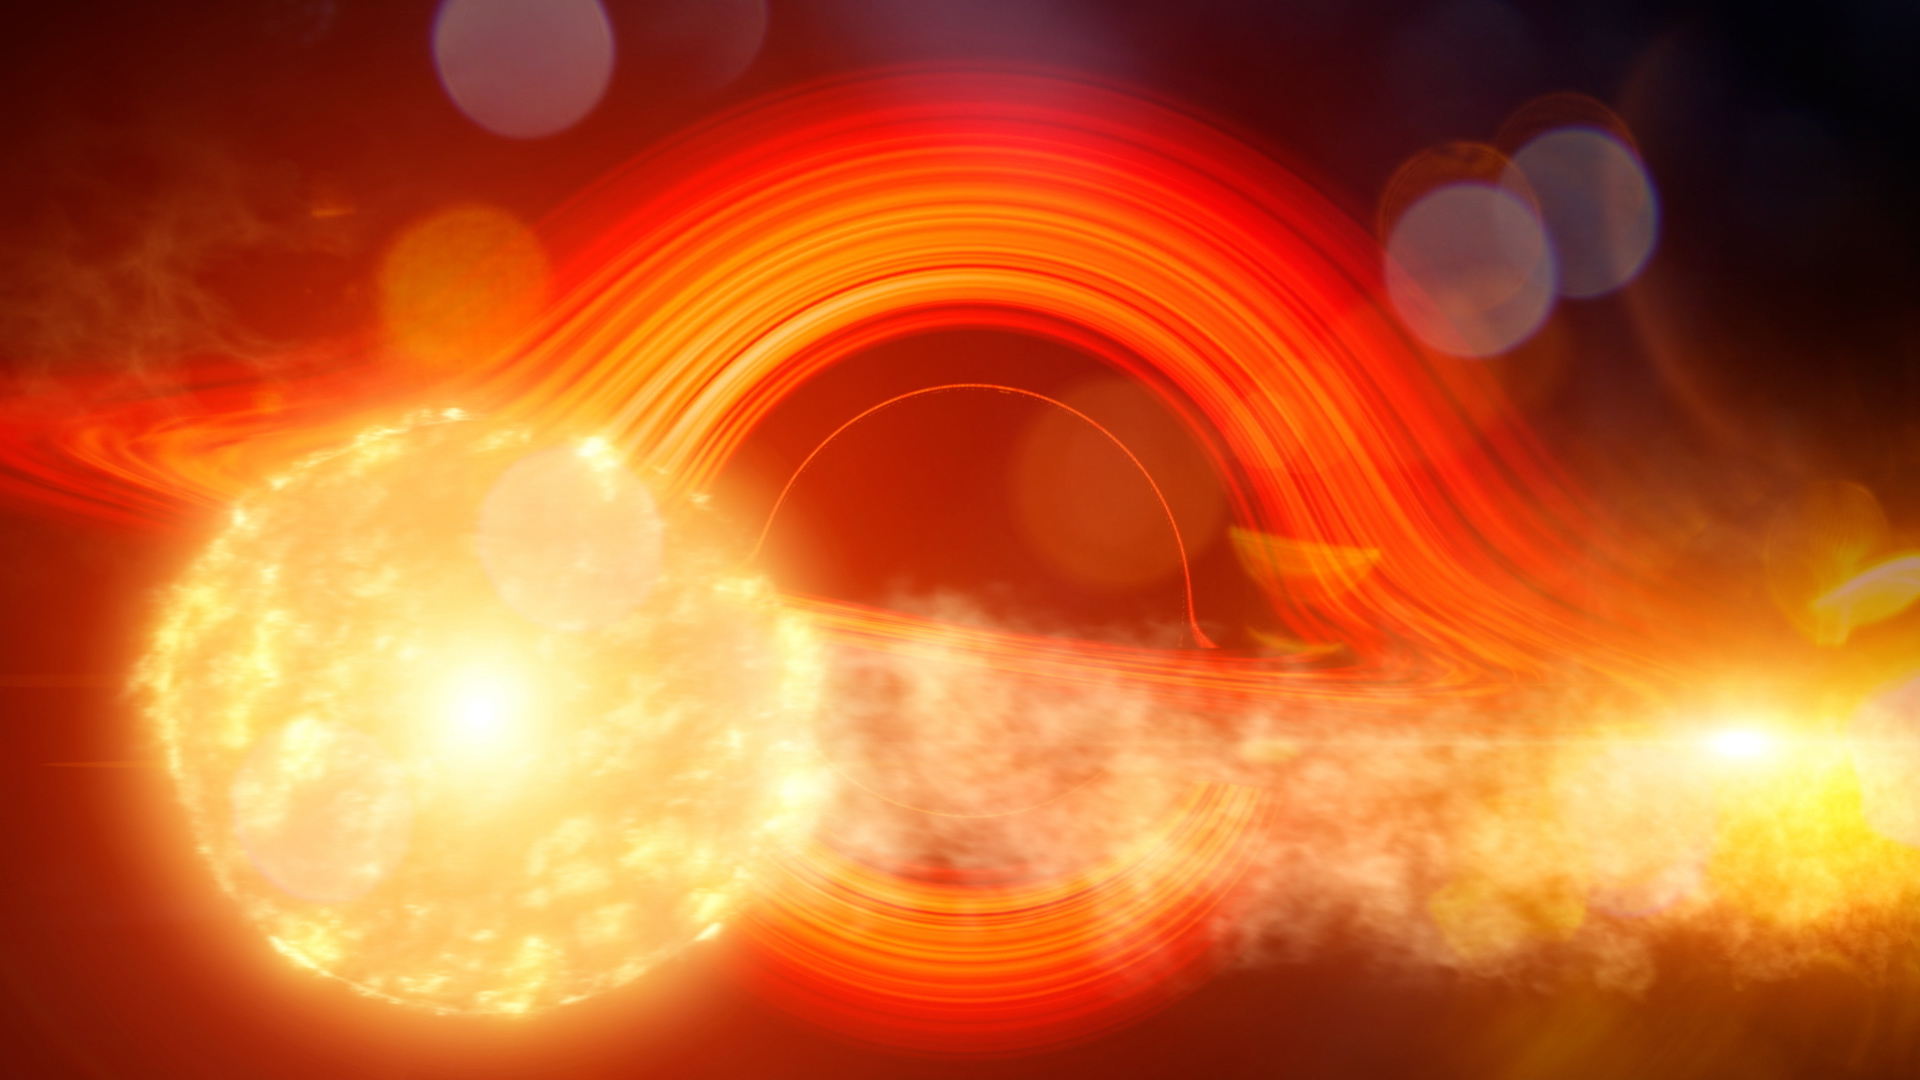 Watch as a monster black hole partially consumes an orbiting giant star. In this illustration, the gas pulled from the star collides with the black hole’s debris disk and causes a flare. Astronomers have named this repeating event ASASSN-14ko. The flares are the most predictable and frequent yet seen from an active galaxy. Credit: NASA’s Goddard Space Flight CenterMusic: "Ruminations" from Universal Production MusicComplete transcript available.